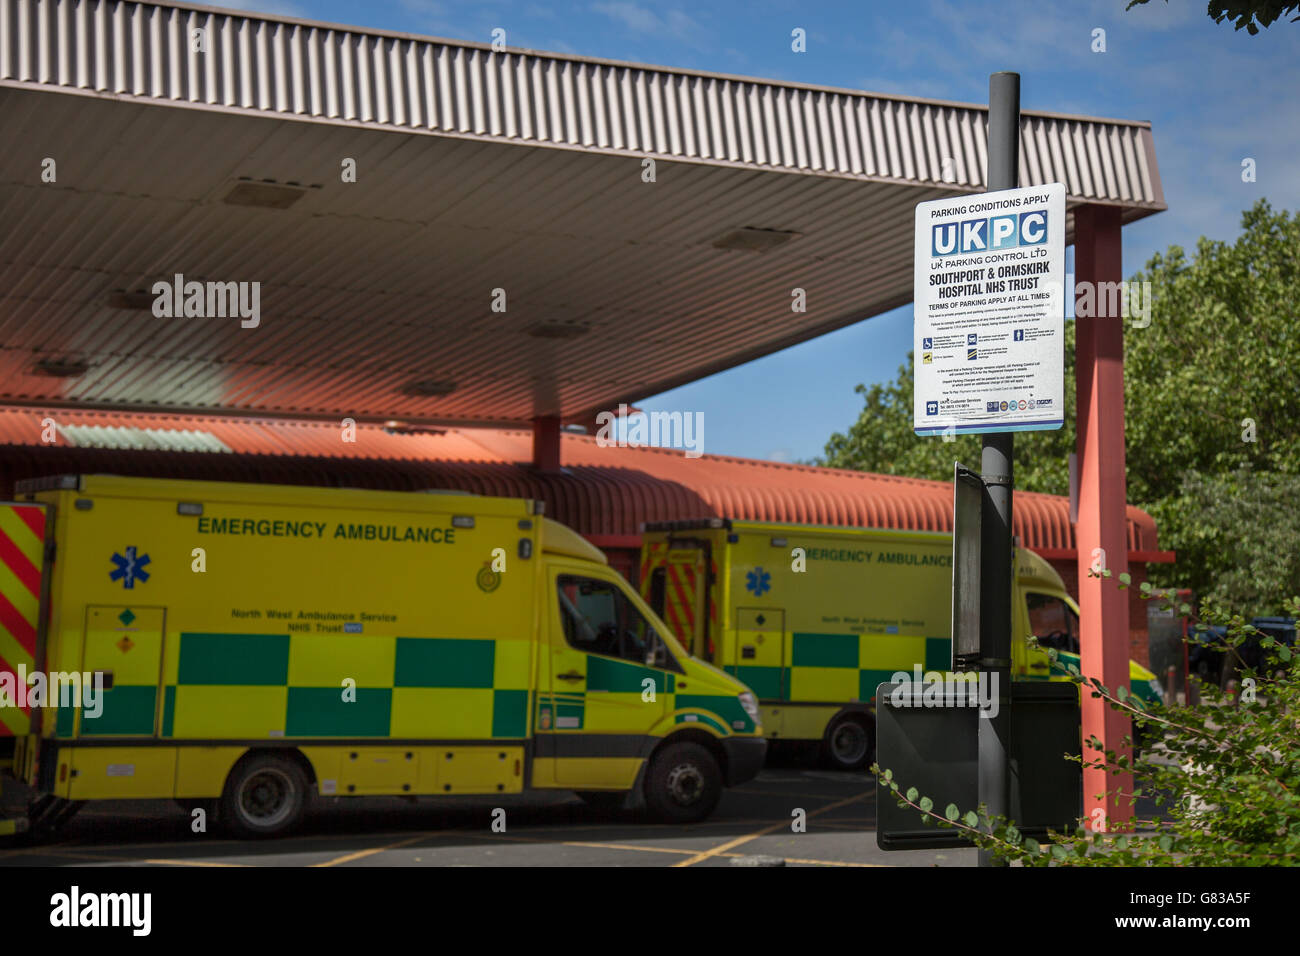 NHS Trust Southport and Formby Hospital, information and signs for hospital parking charges, UK. Stock Photo